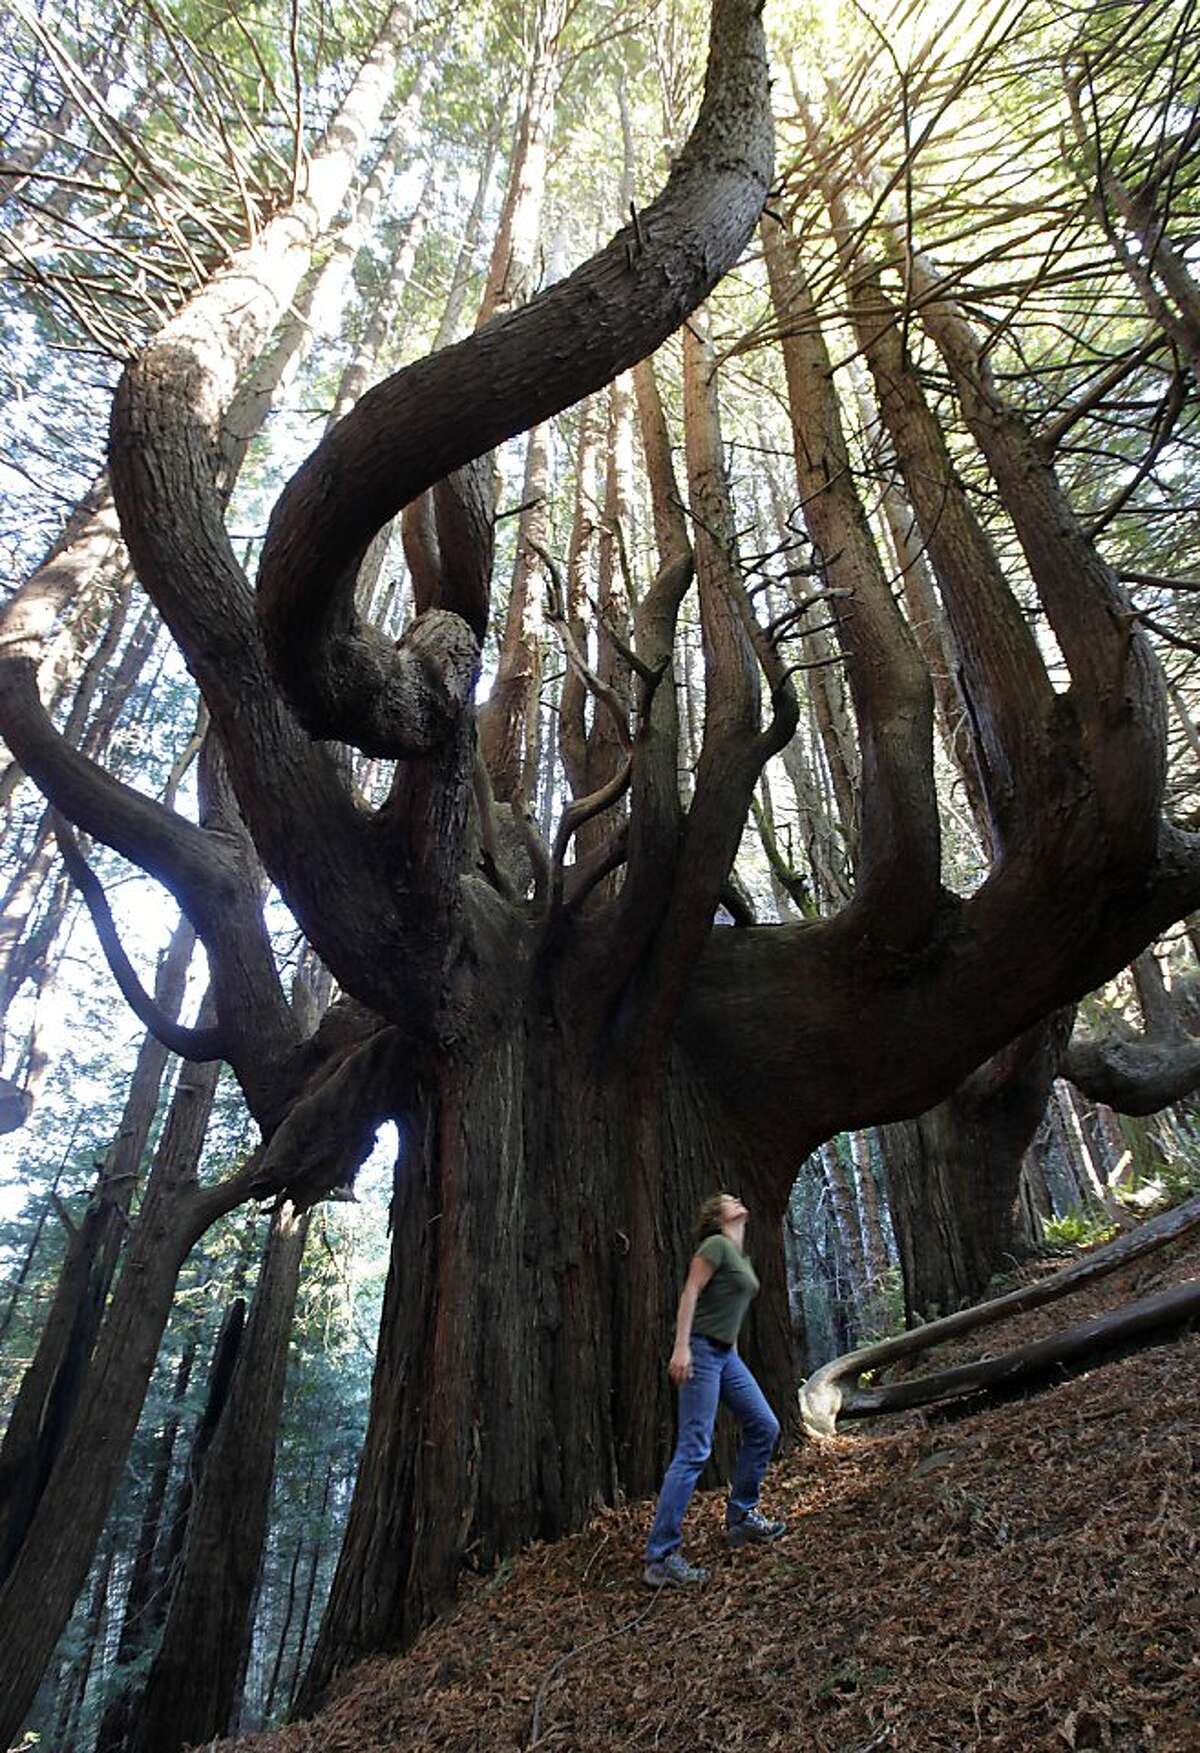 Christine Ambrose, project manager of the Shady Dell project and a member of the Save the Redwoods League, walks through the, trees of mystery, part of the dense redwood forest on the acquired Shady Dell property in Usal, Ca. on Wednesday November 02, 2011. Save the Redwoods League is working with partners to protect 957 acres of remote redwood forest known as Shady Dell and extend California's rugged Lost Coast Trail.